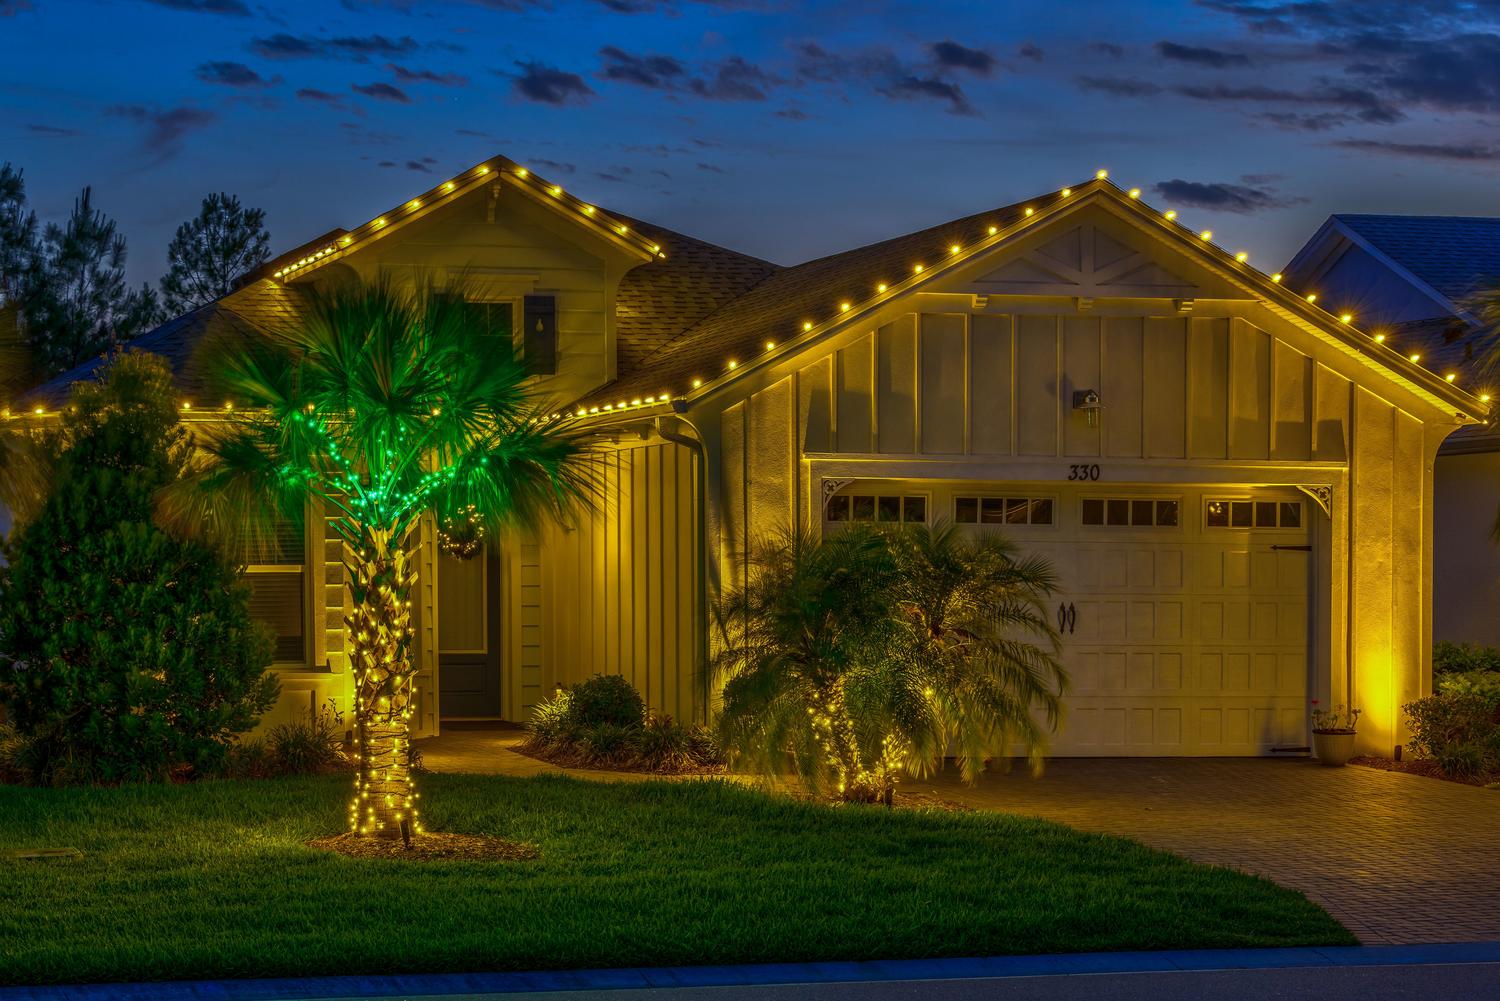 house with holiday lights and palm tree with lights